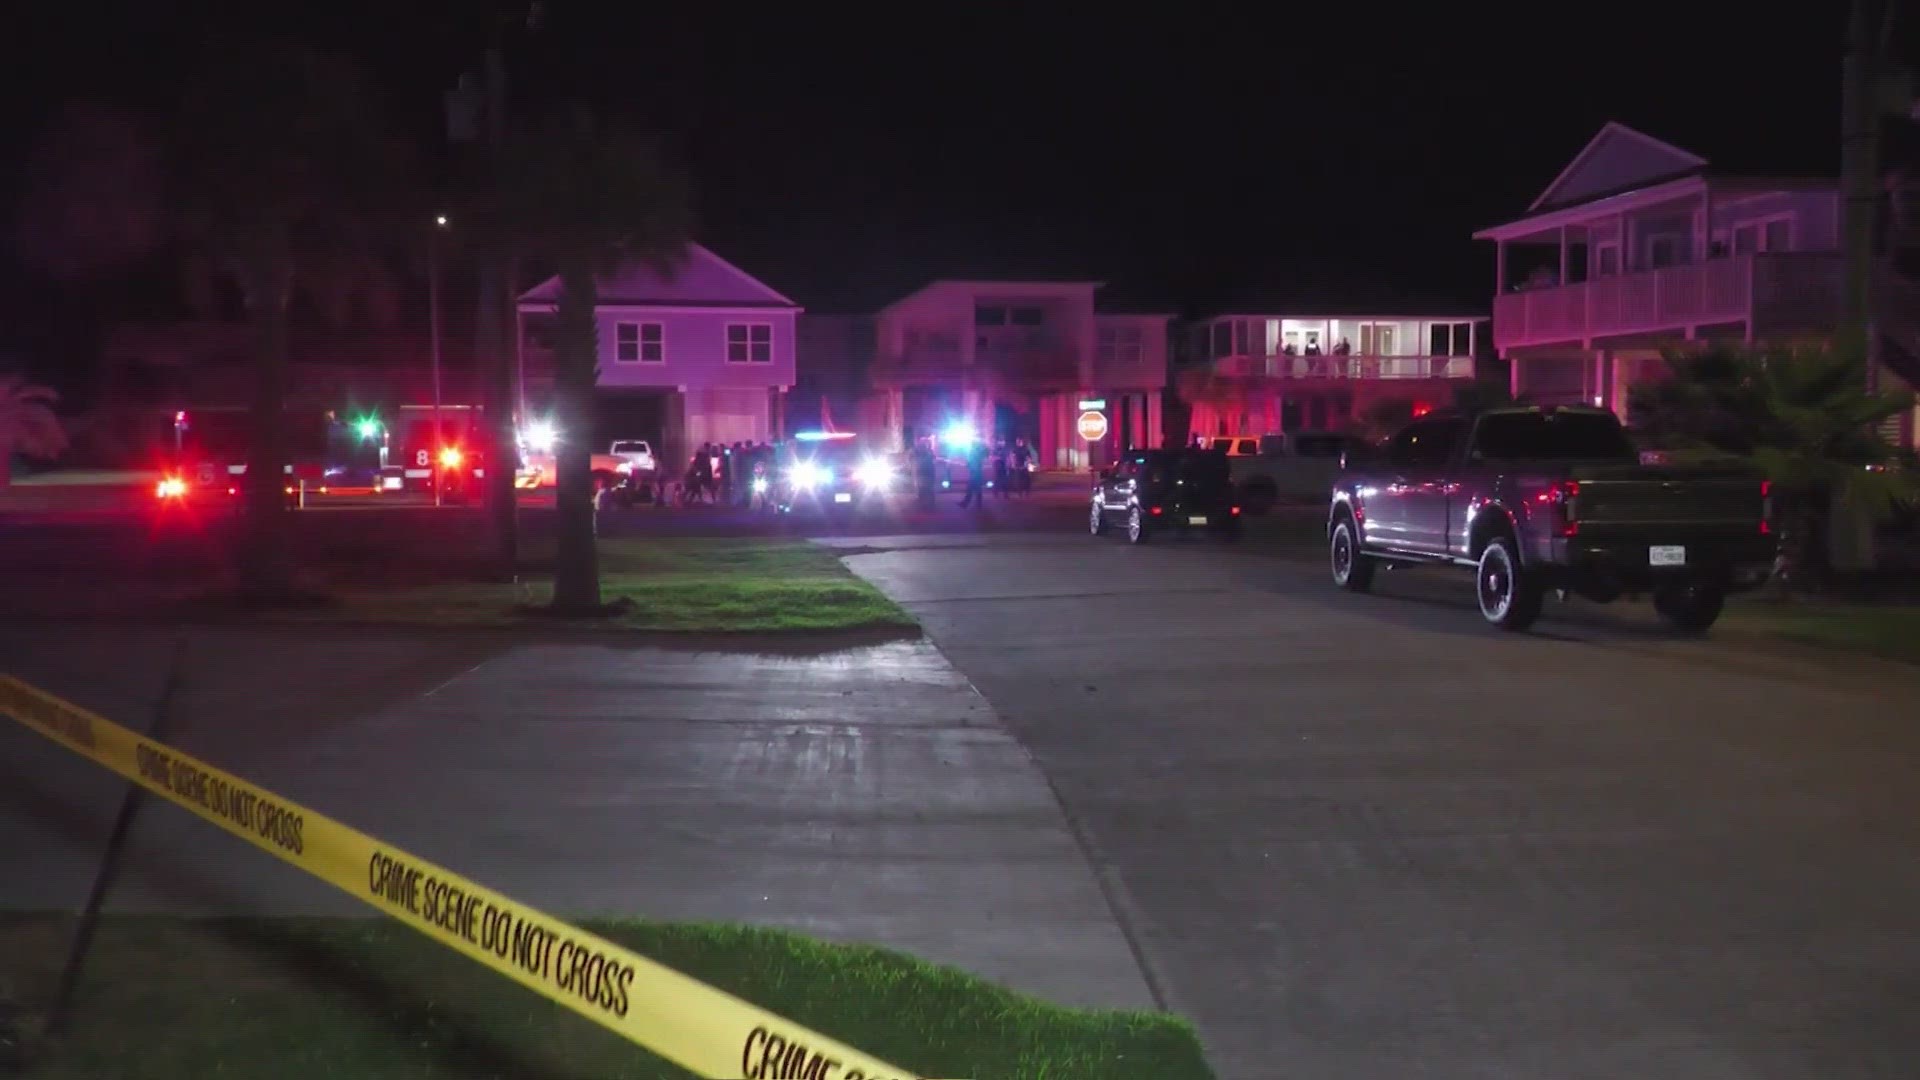 Galveston police said they've interviewed at least a dozen people so far about the shooting.